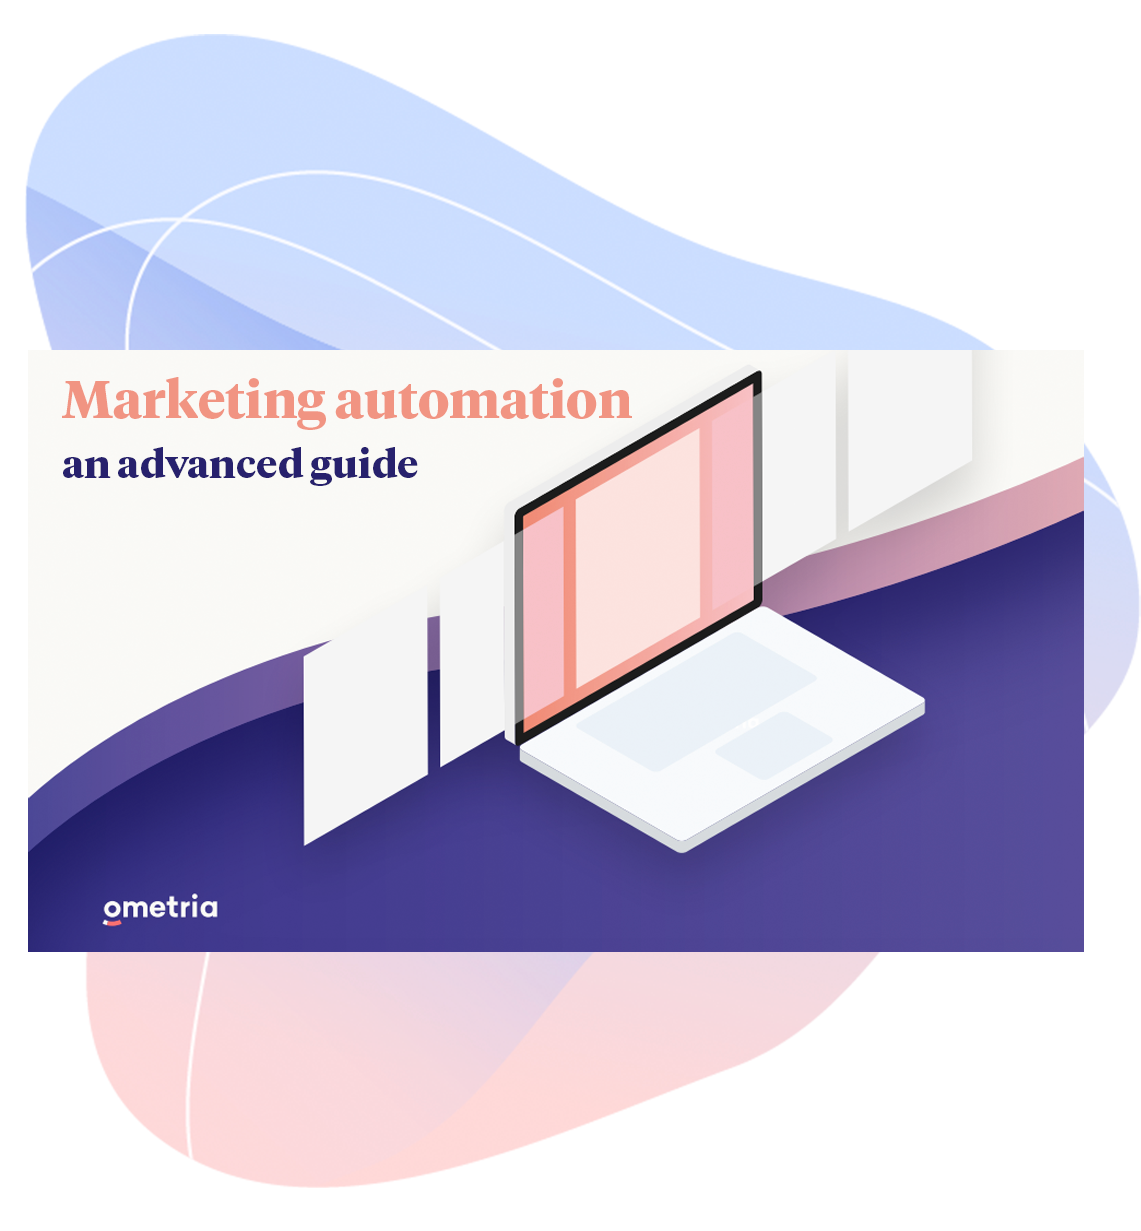 Advanced guide to marketing automation